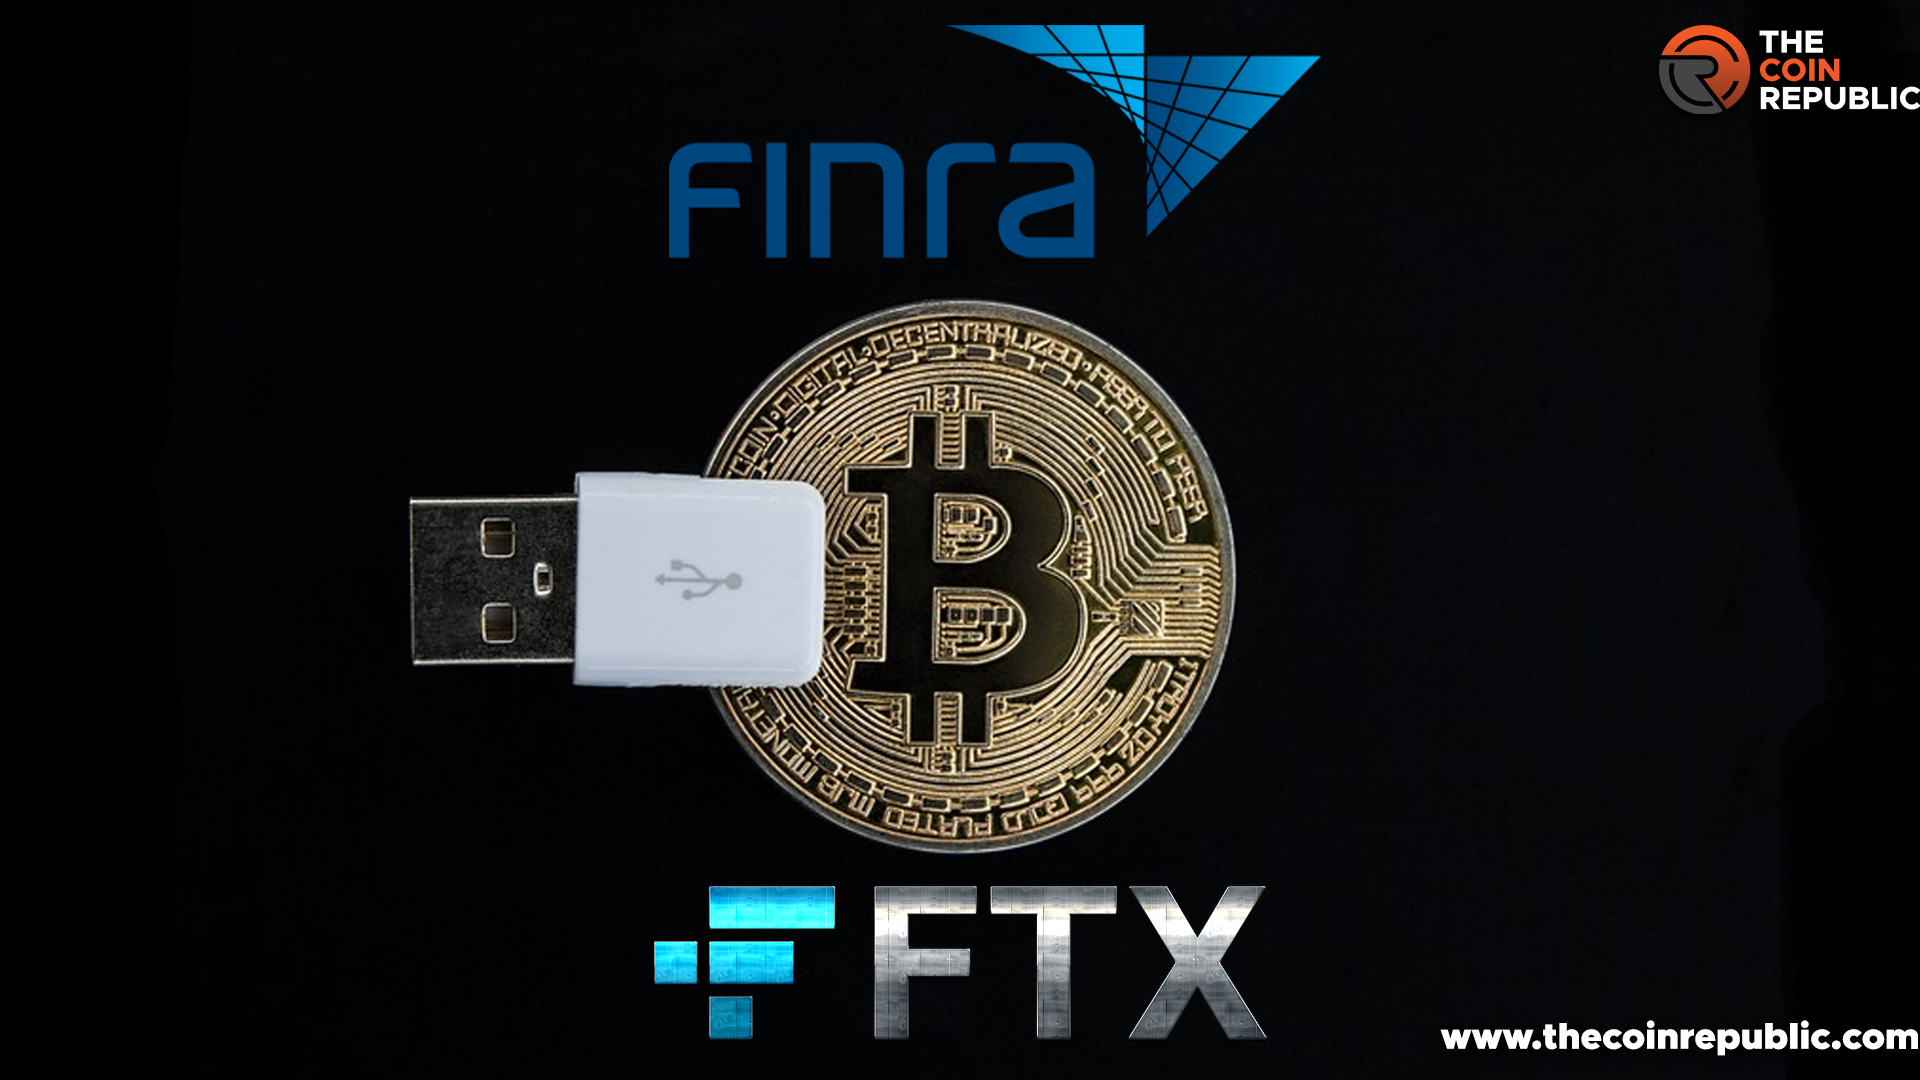 FINRA to Examine Crypto Communication After FTX Crash